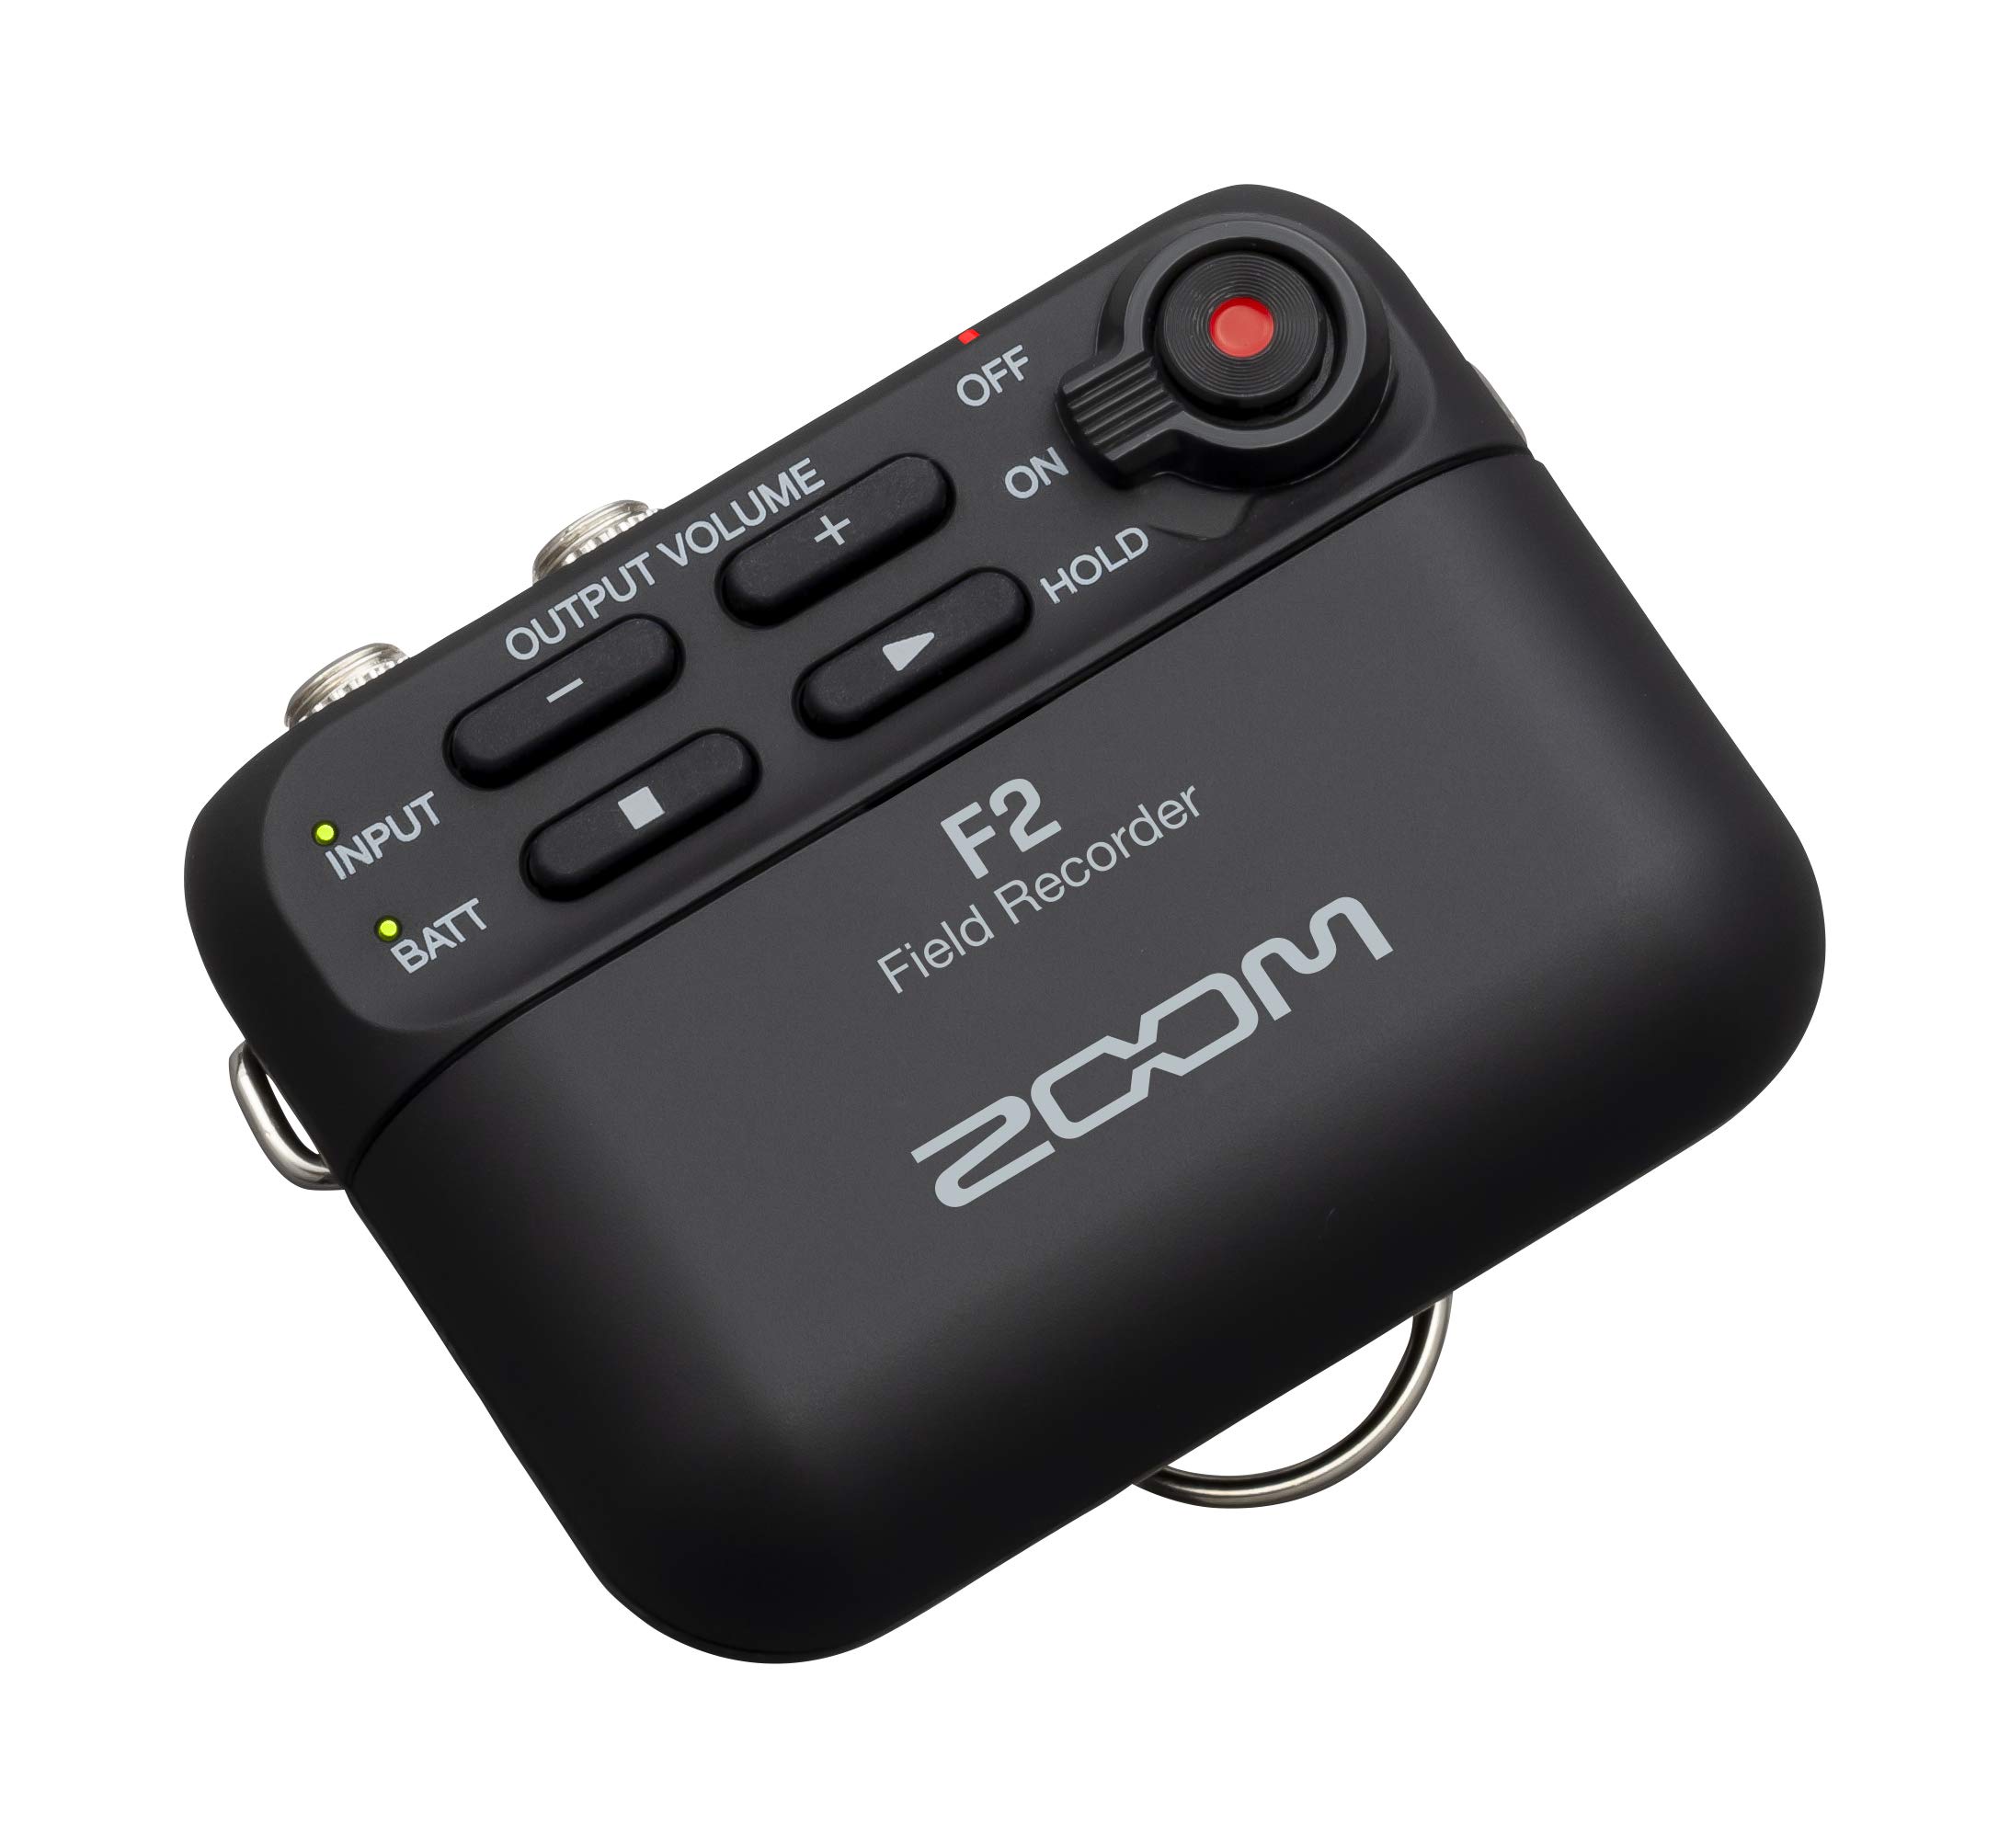 Zoom F2 Lavalier Body-Pack Compact Recorder, 32-Bit Float Recording, No Clipping, Audio for Video, Records to SD, and Battery Powered with Included Lavalier Microphone